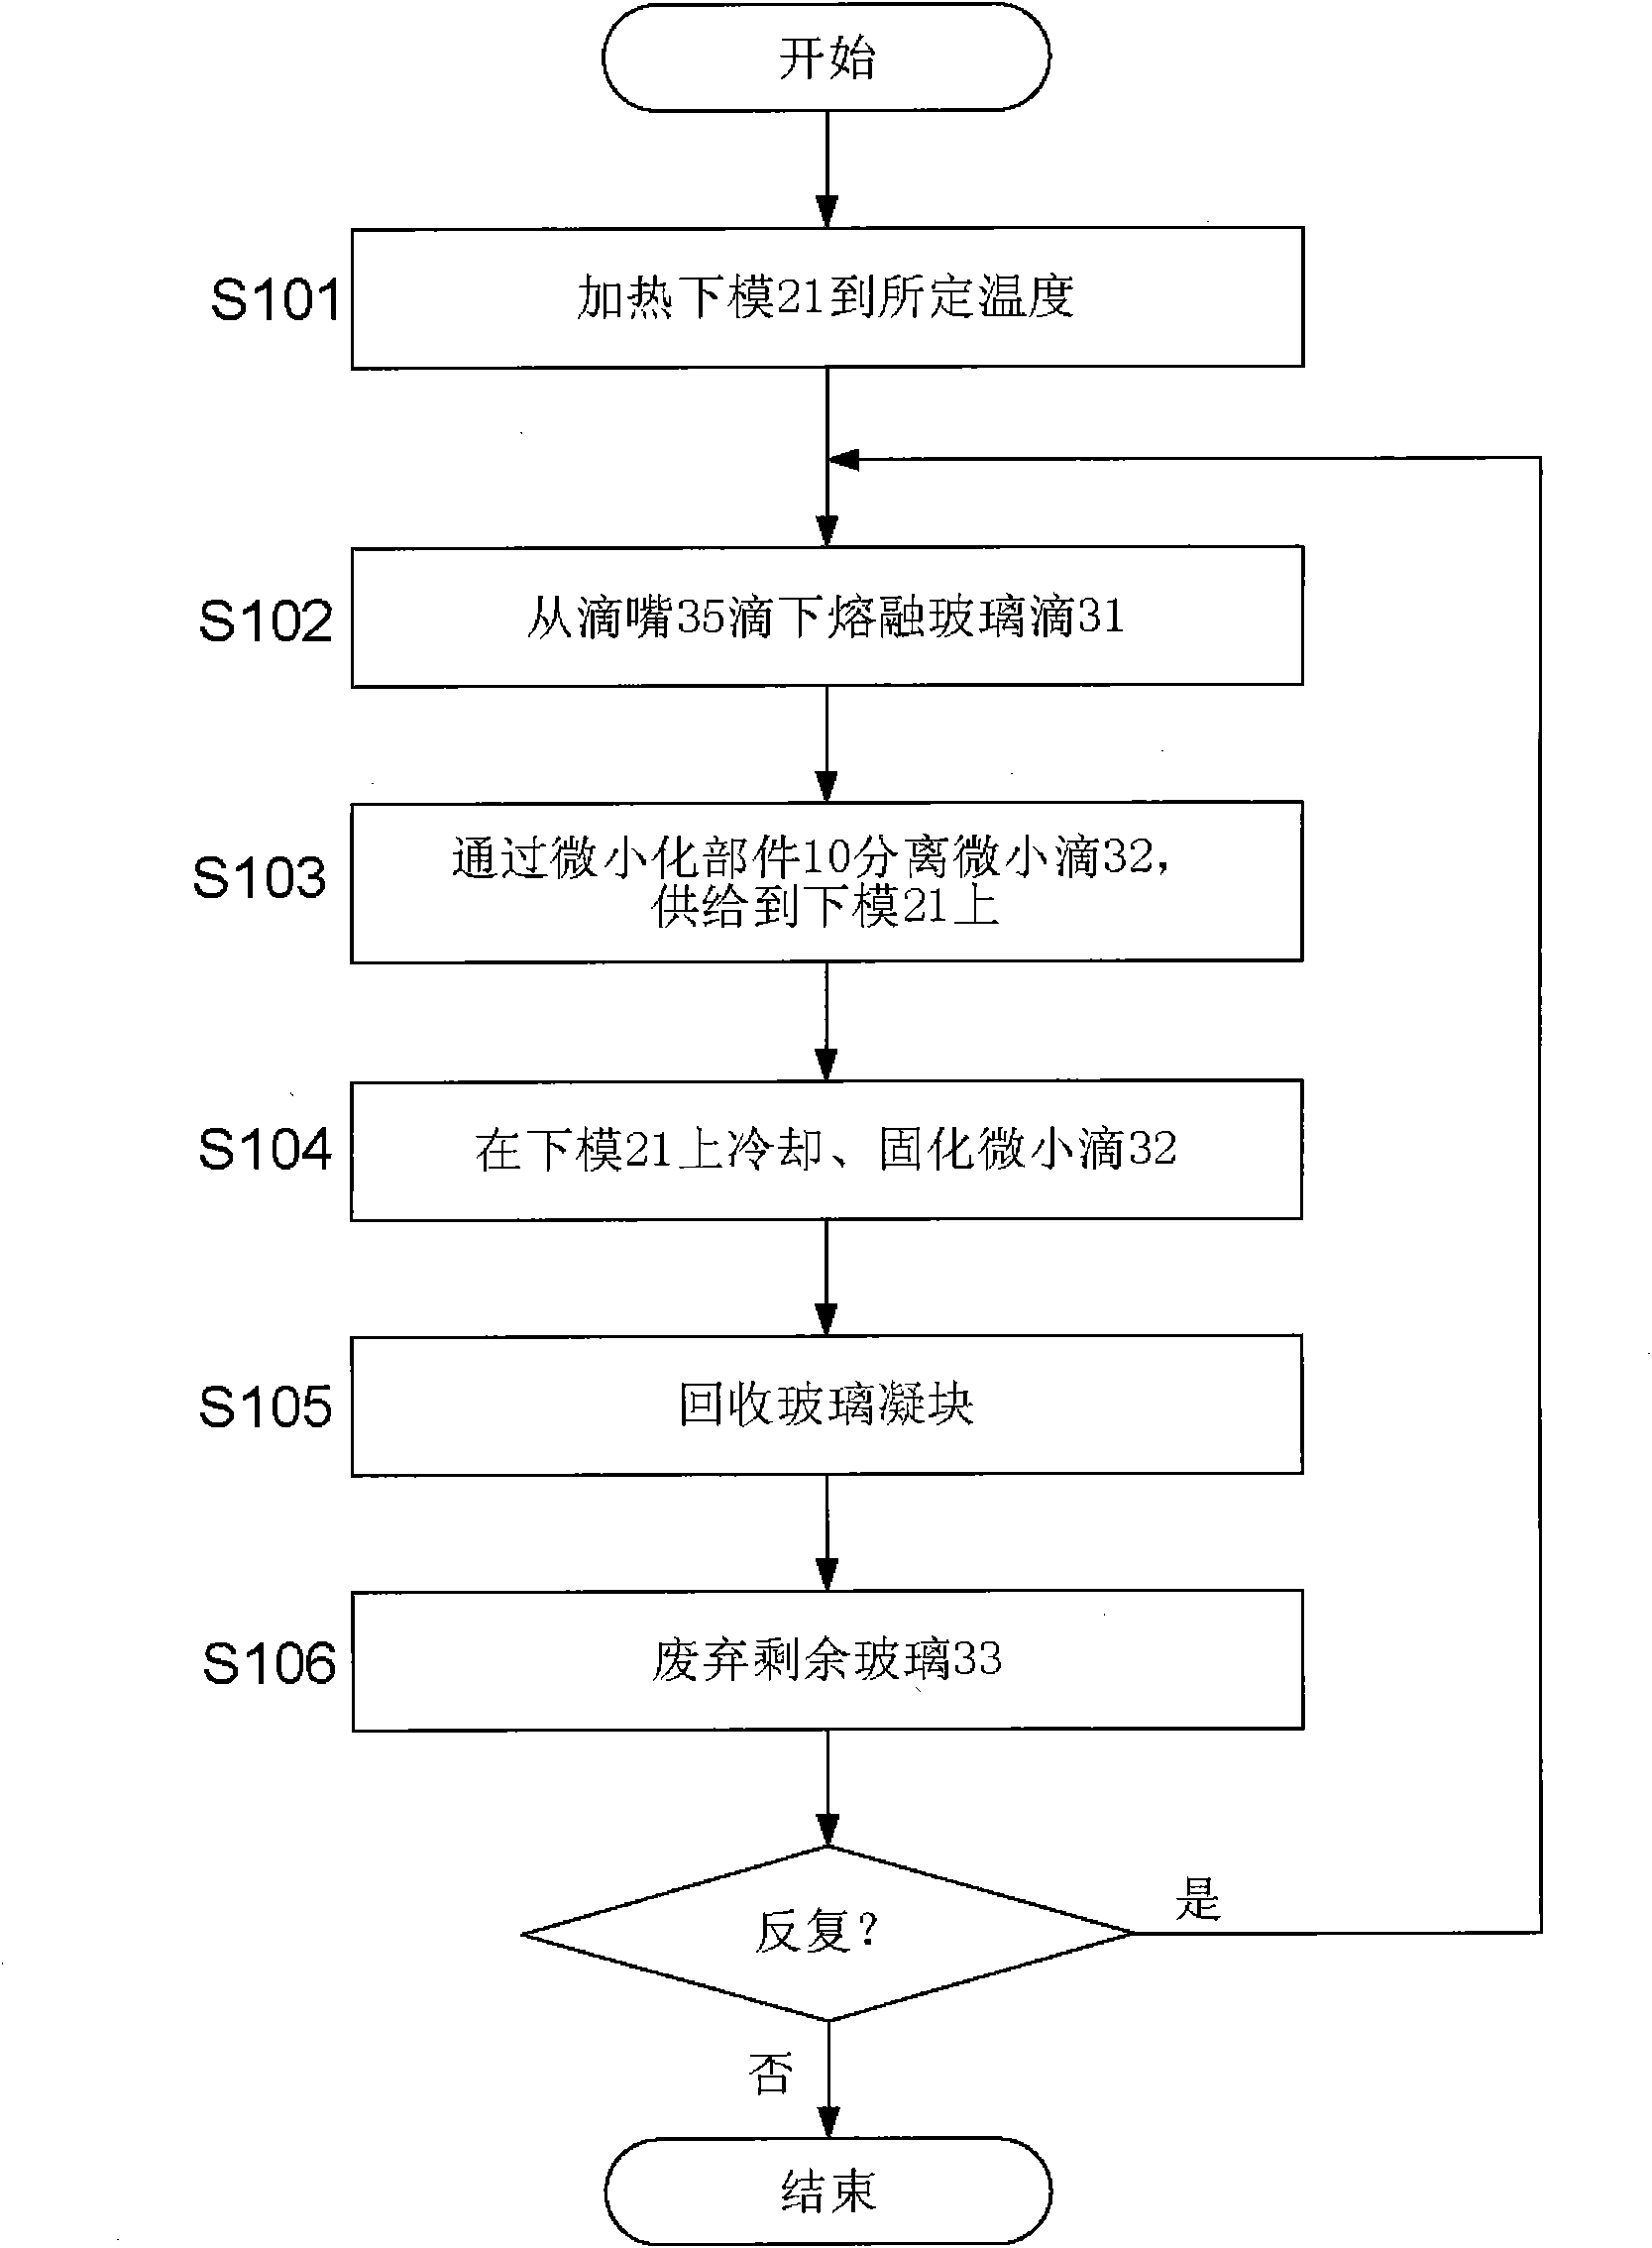 Member for miniaturizing molten glass droplet, method for producing glass gob, method for producing glass molding, and method for producing minute glass droplet